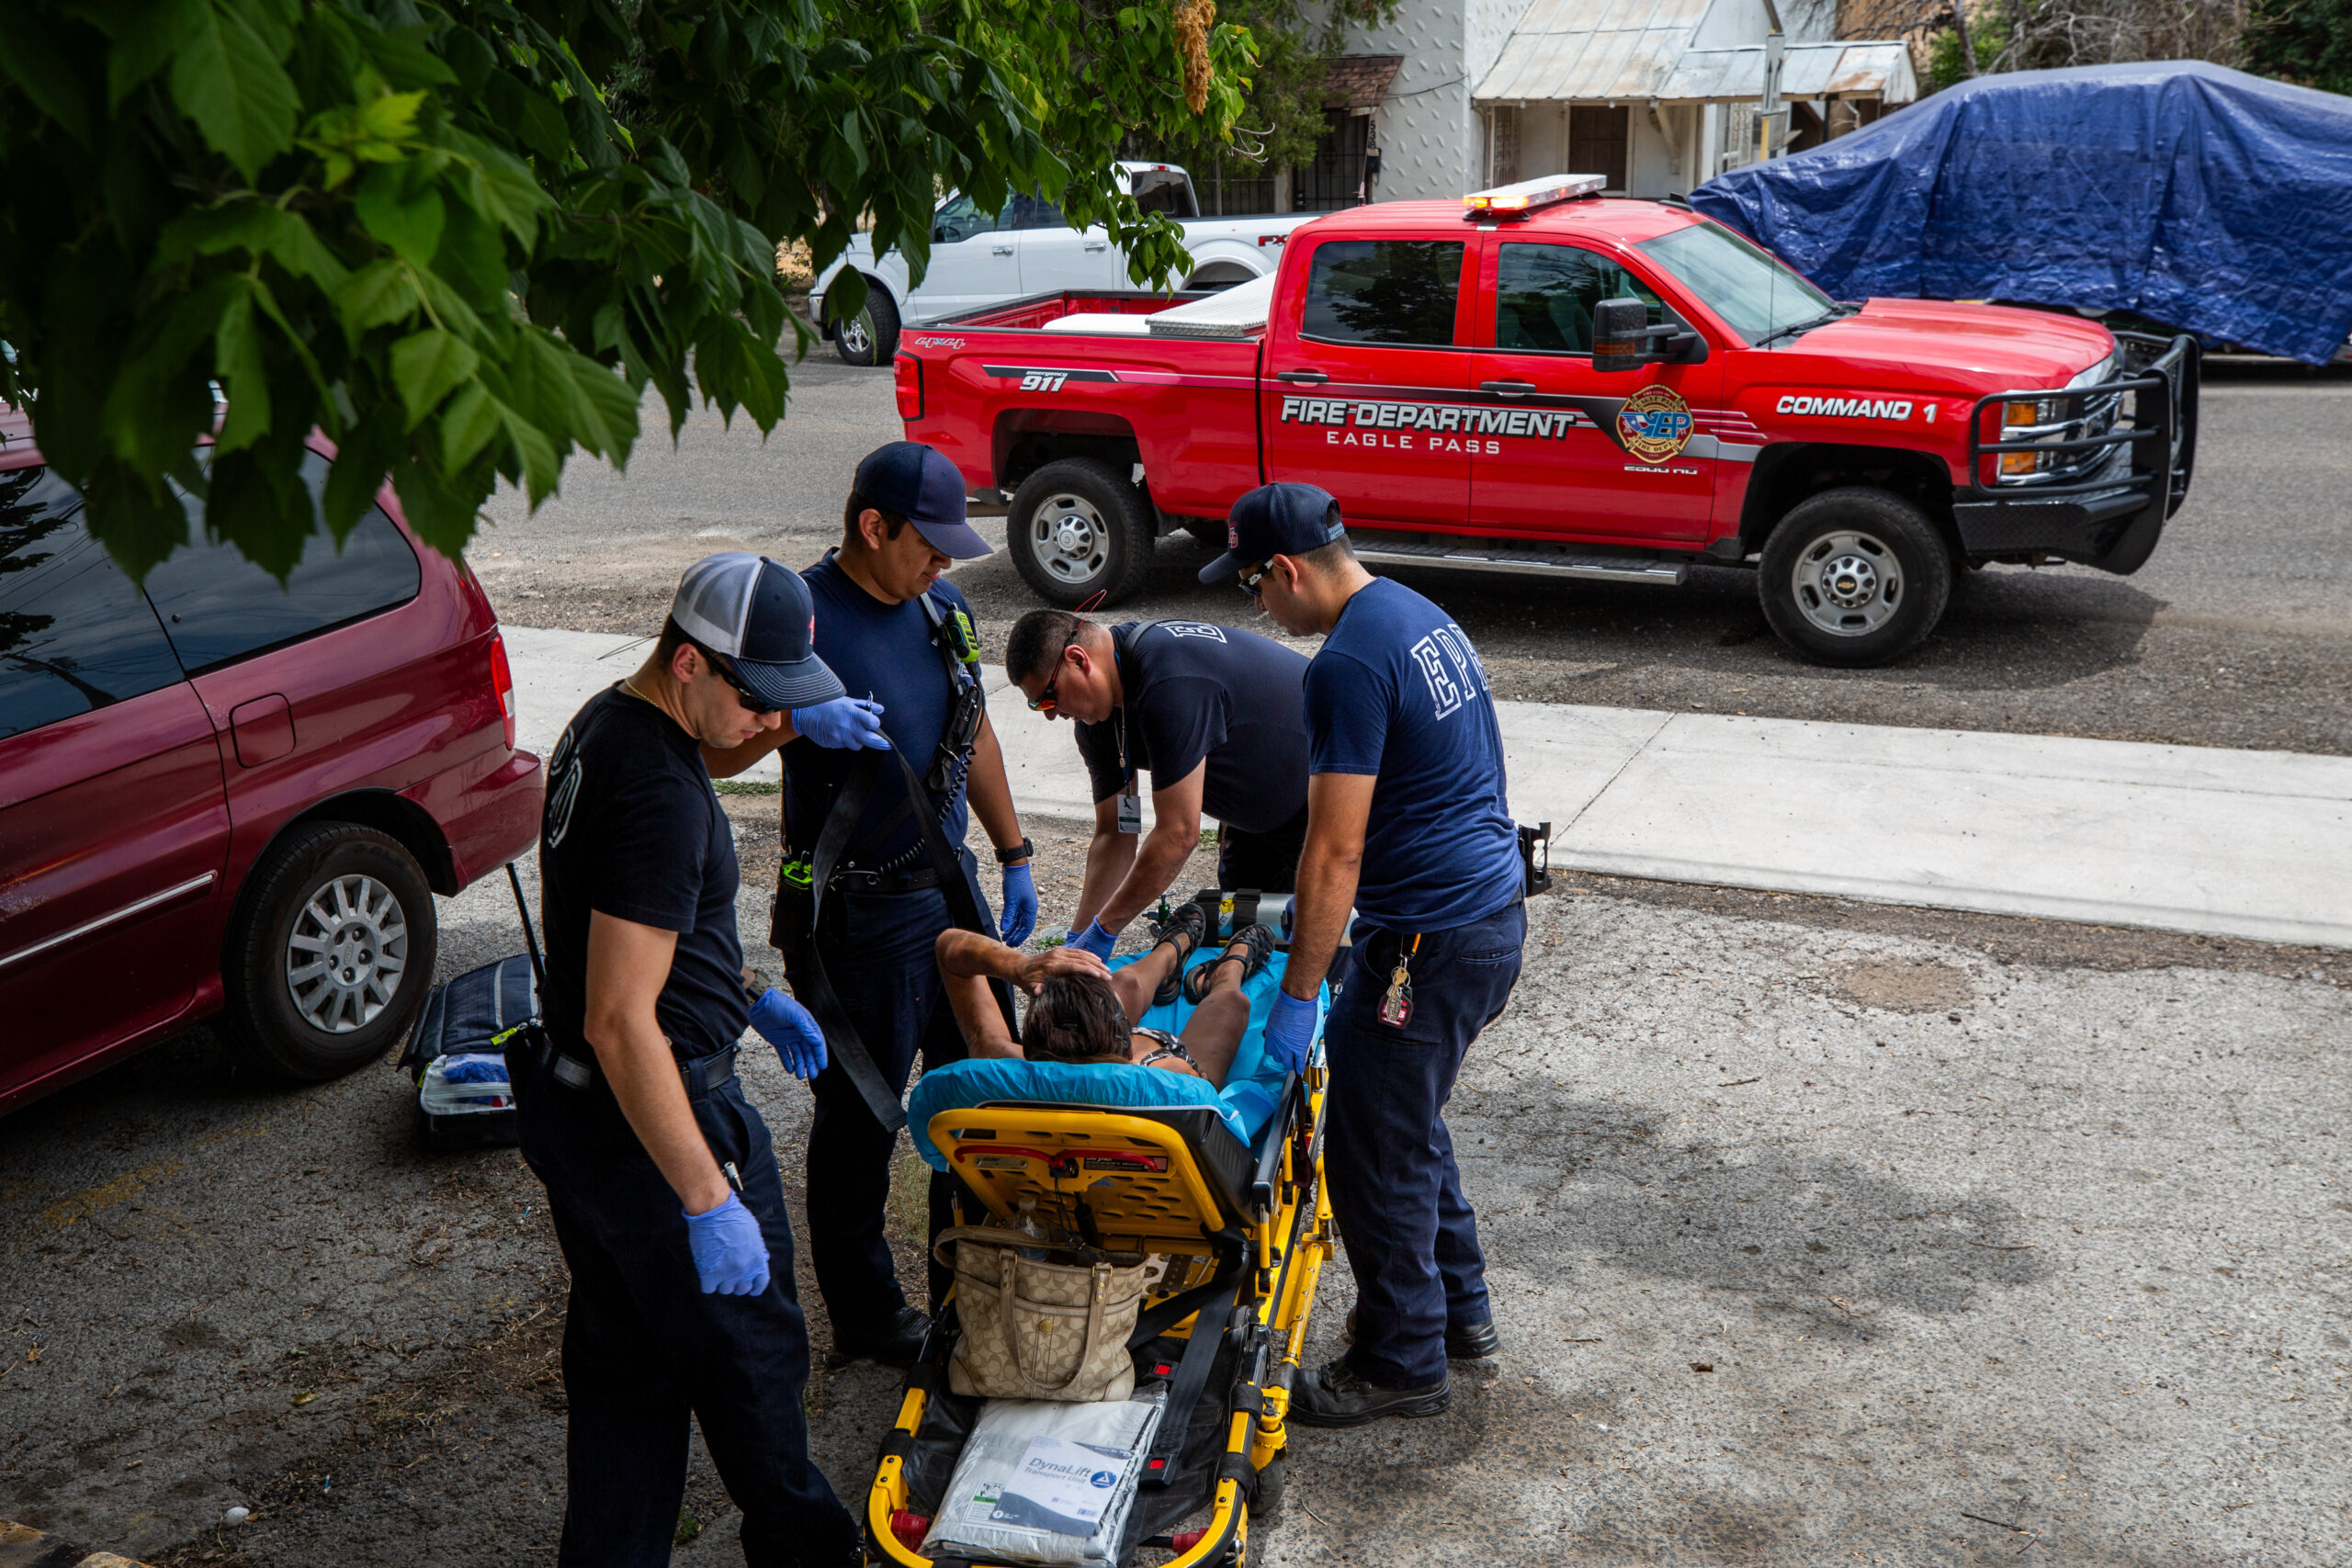 From left to right, firefighter EMTs Harish Garcia, Jose Garza, Luis Huerta, and Pedro Olivares transport a disoriented woman to the hospital.